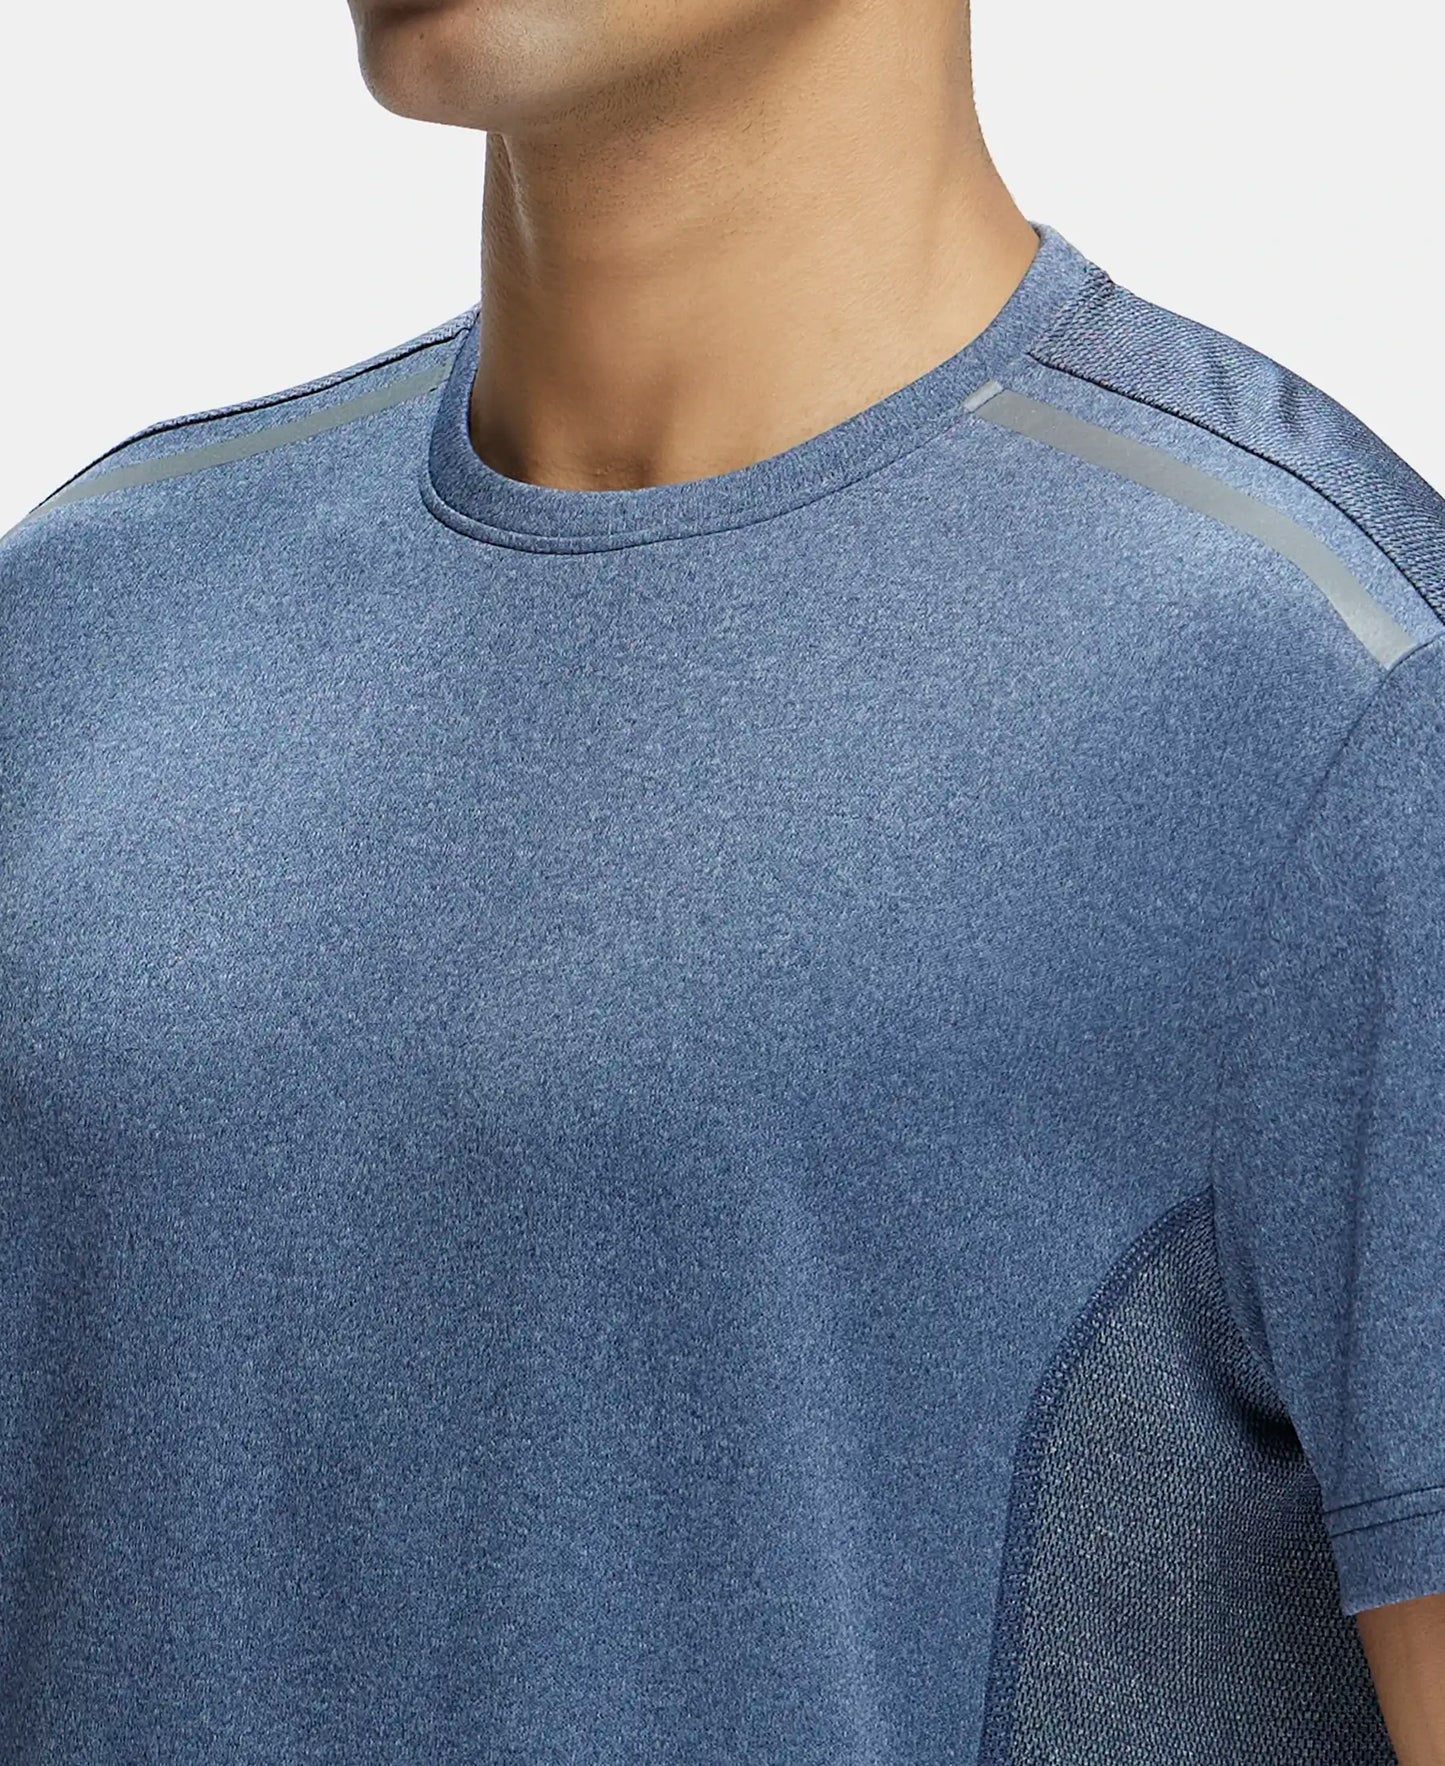 Recycled Microfiber Elastane Stretch Half Sleeve Round Neck T-Shirt with Breathable Mesh - Navy-6